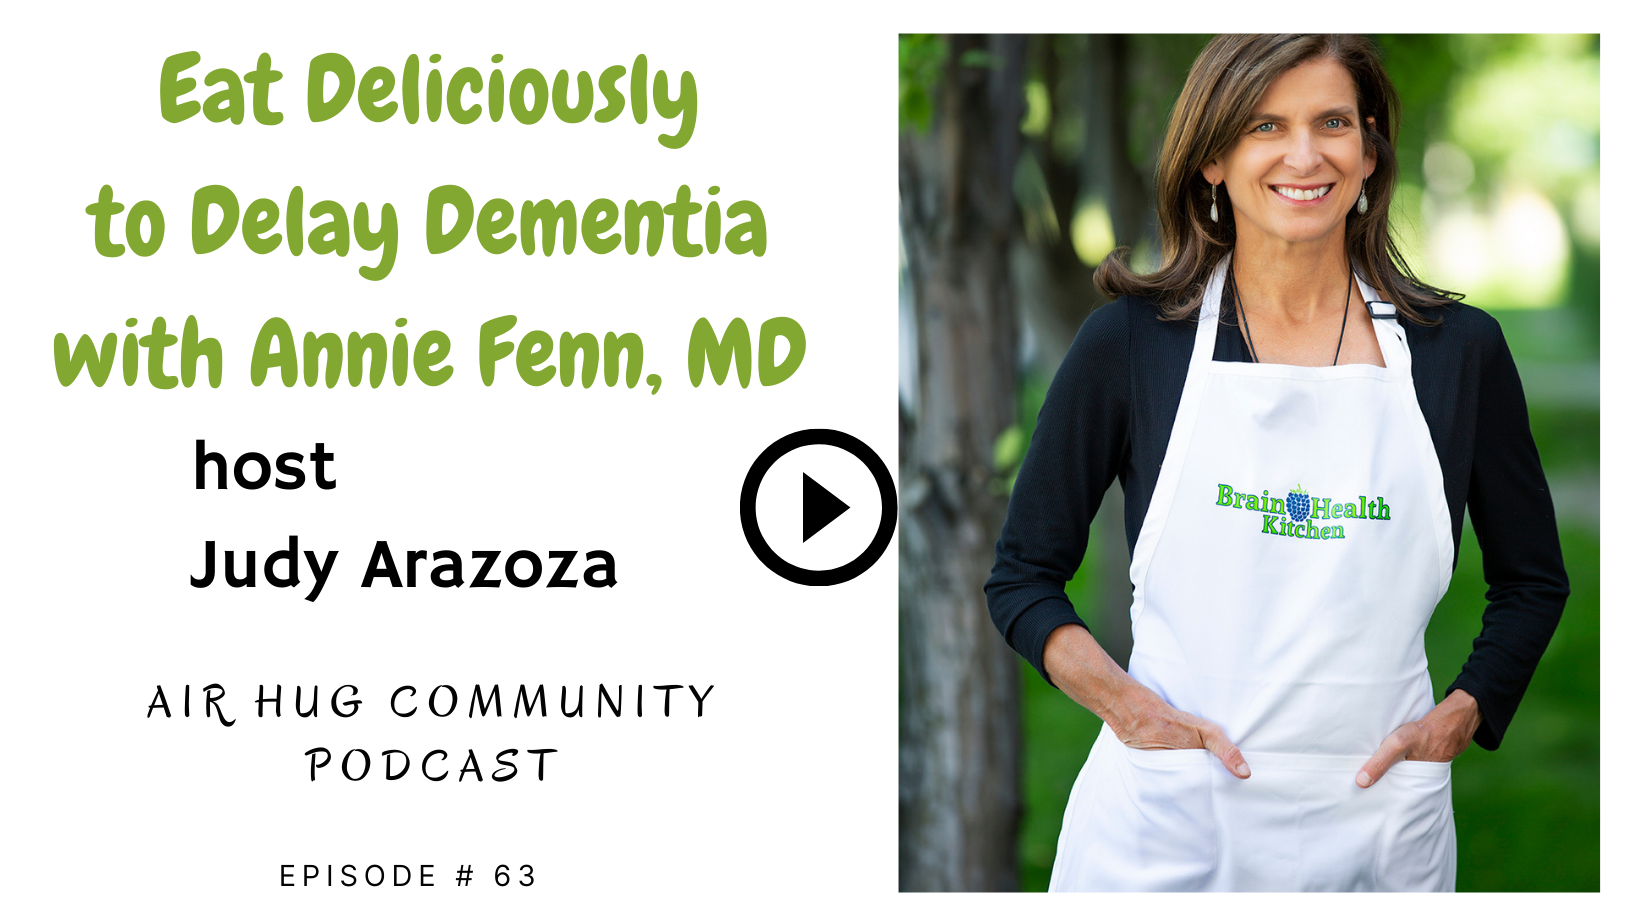 Featured image for “Episode 63: Eat Deliciously to Delay Dementia with Annie Fenn, MD”